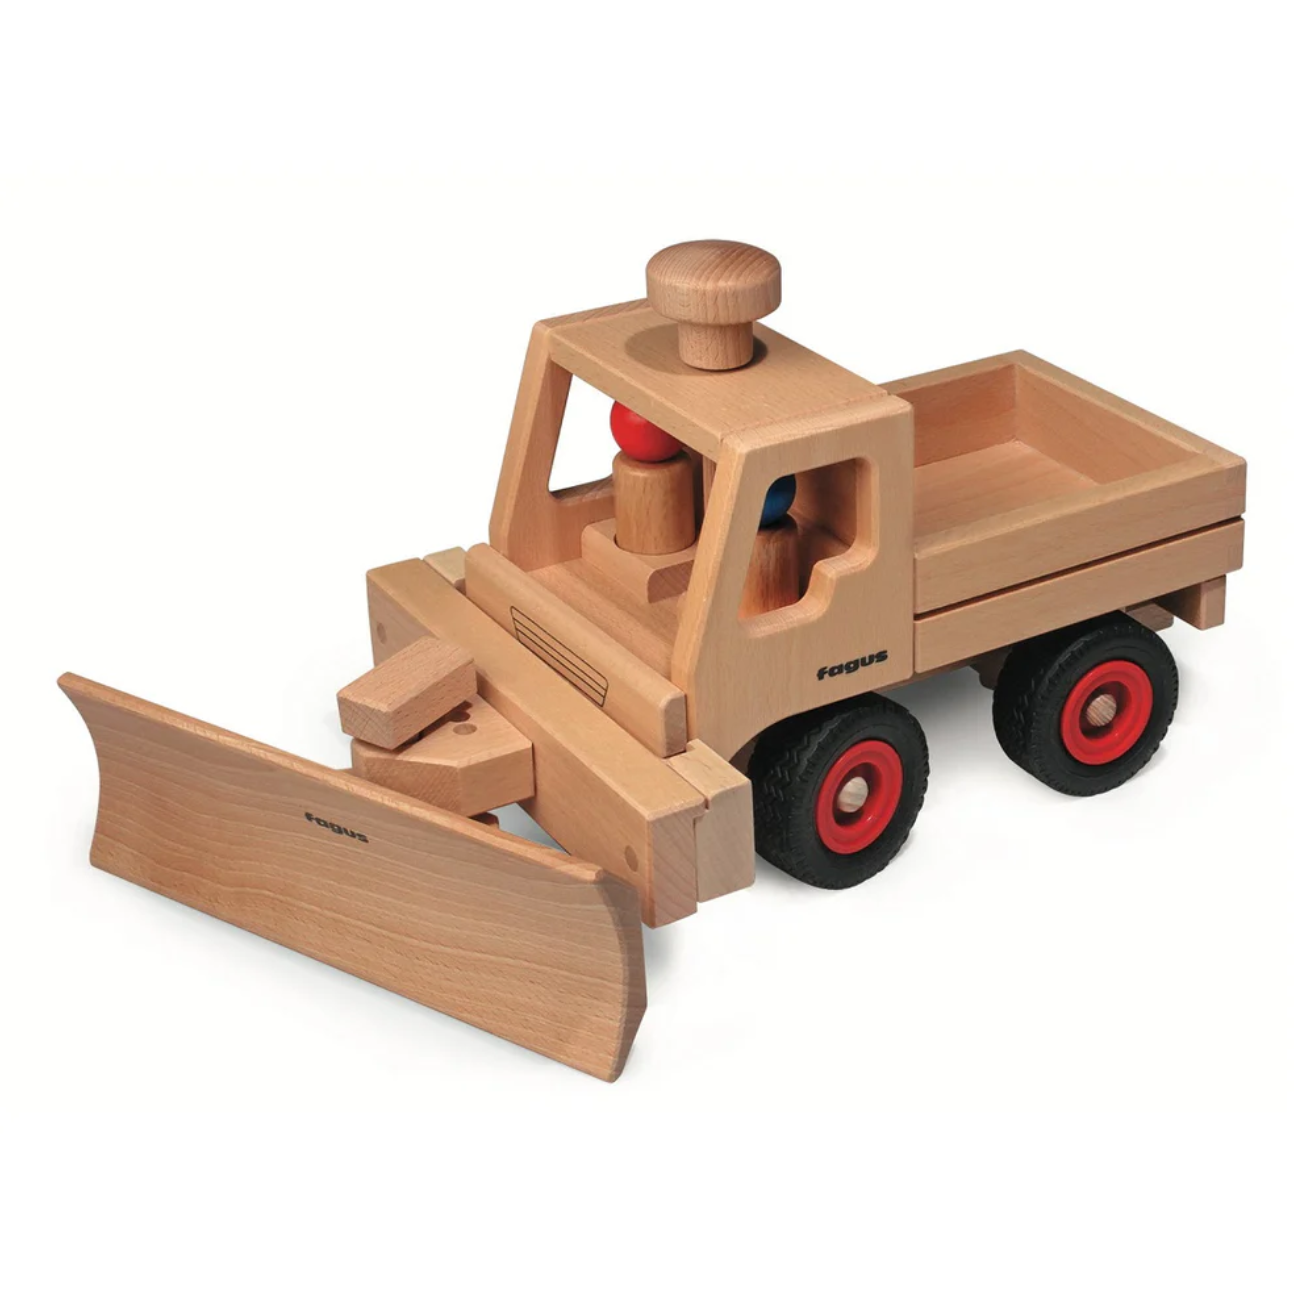 Fagus Snowplough Extension | Wooden Toy Vehicle Accessory